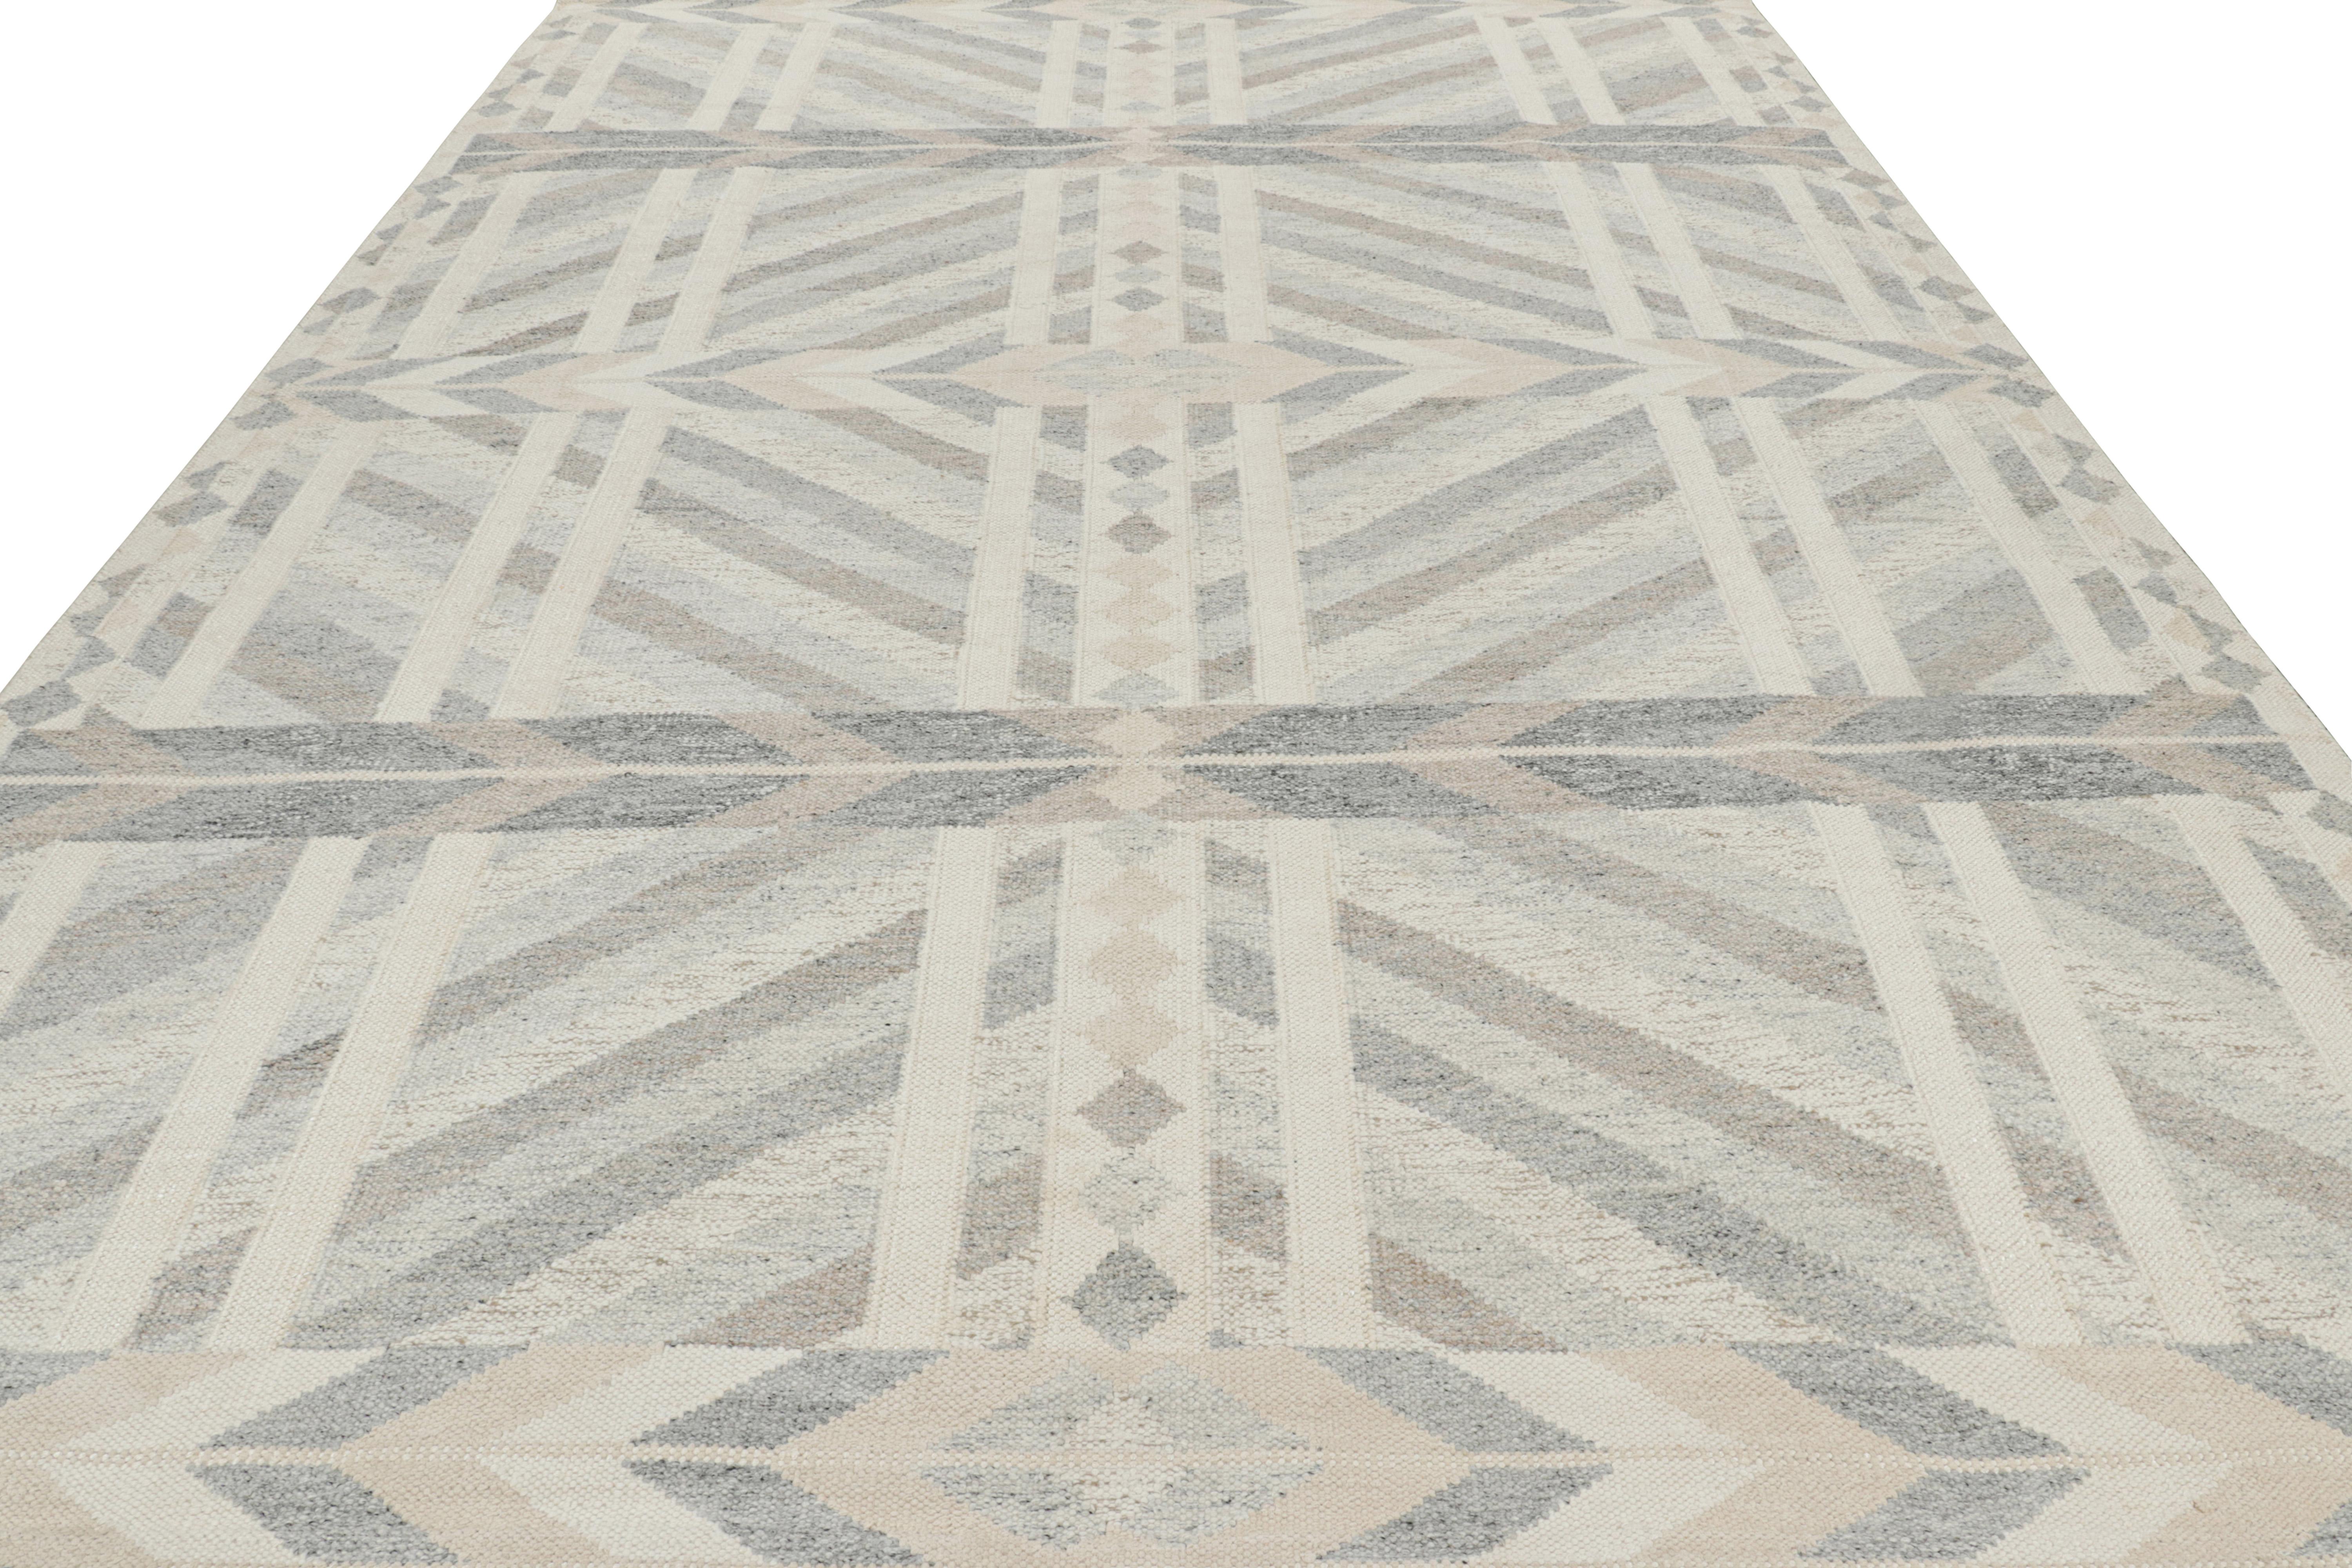 Hand-Woven Rug & Kilim’s Scandinavian Style Rug in Gray Beige and White Geometric Patterns For Sale